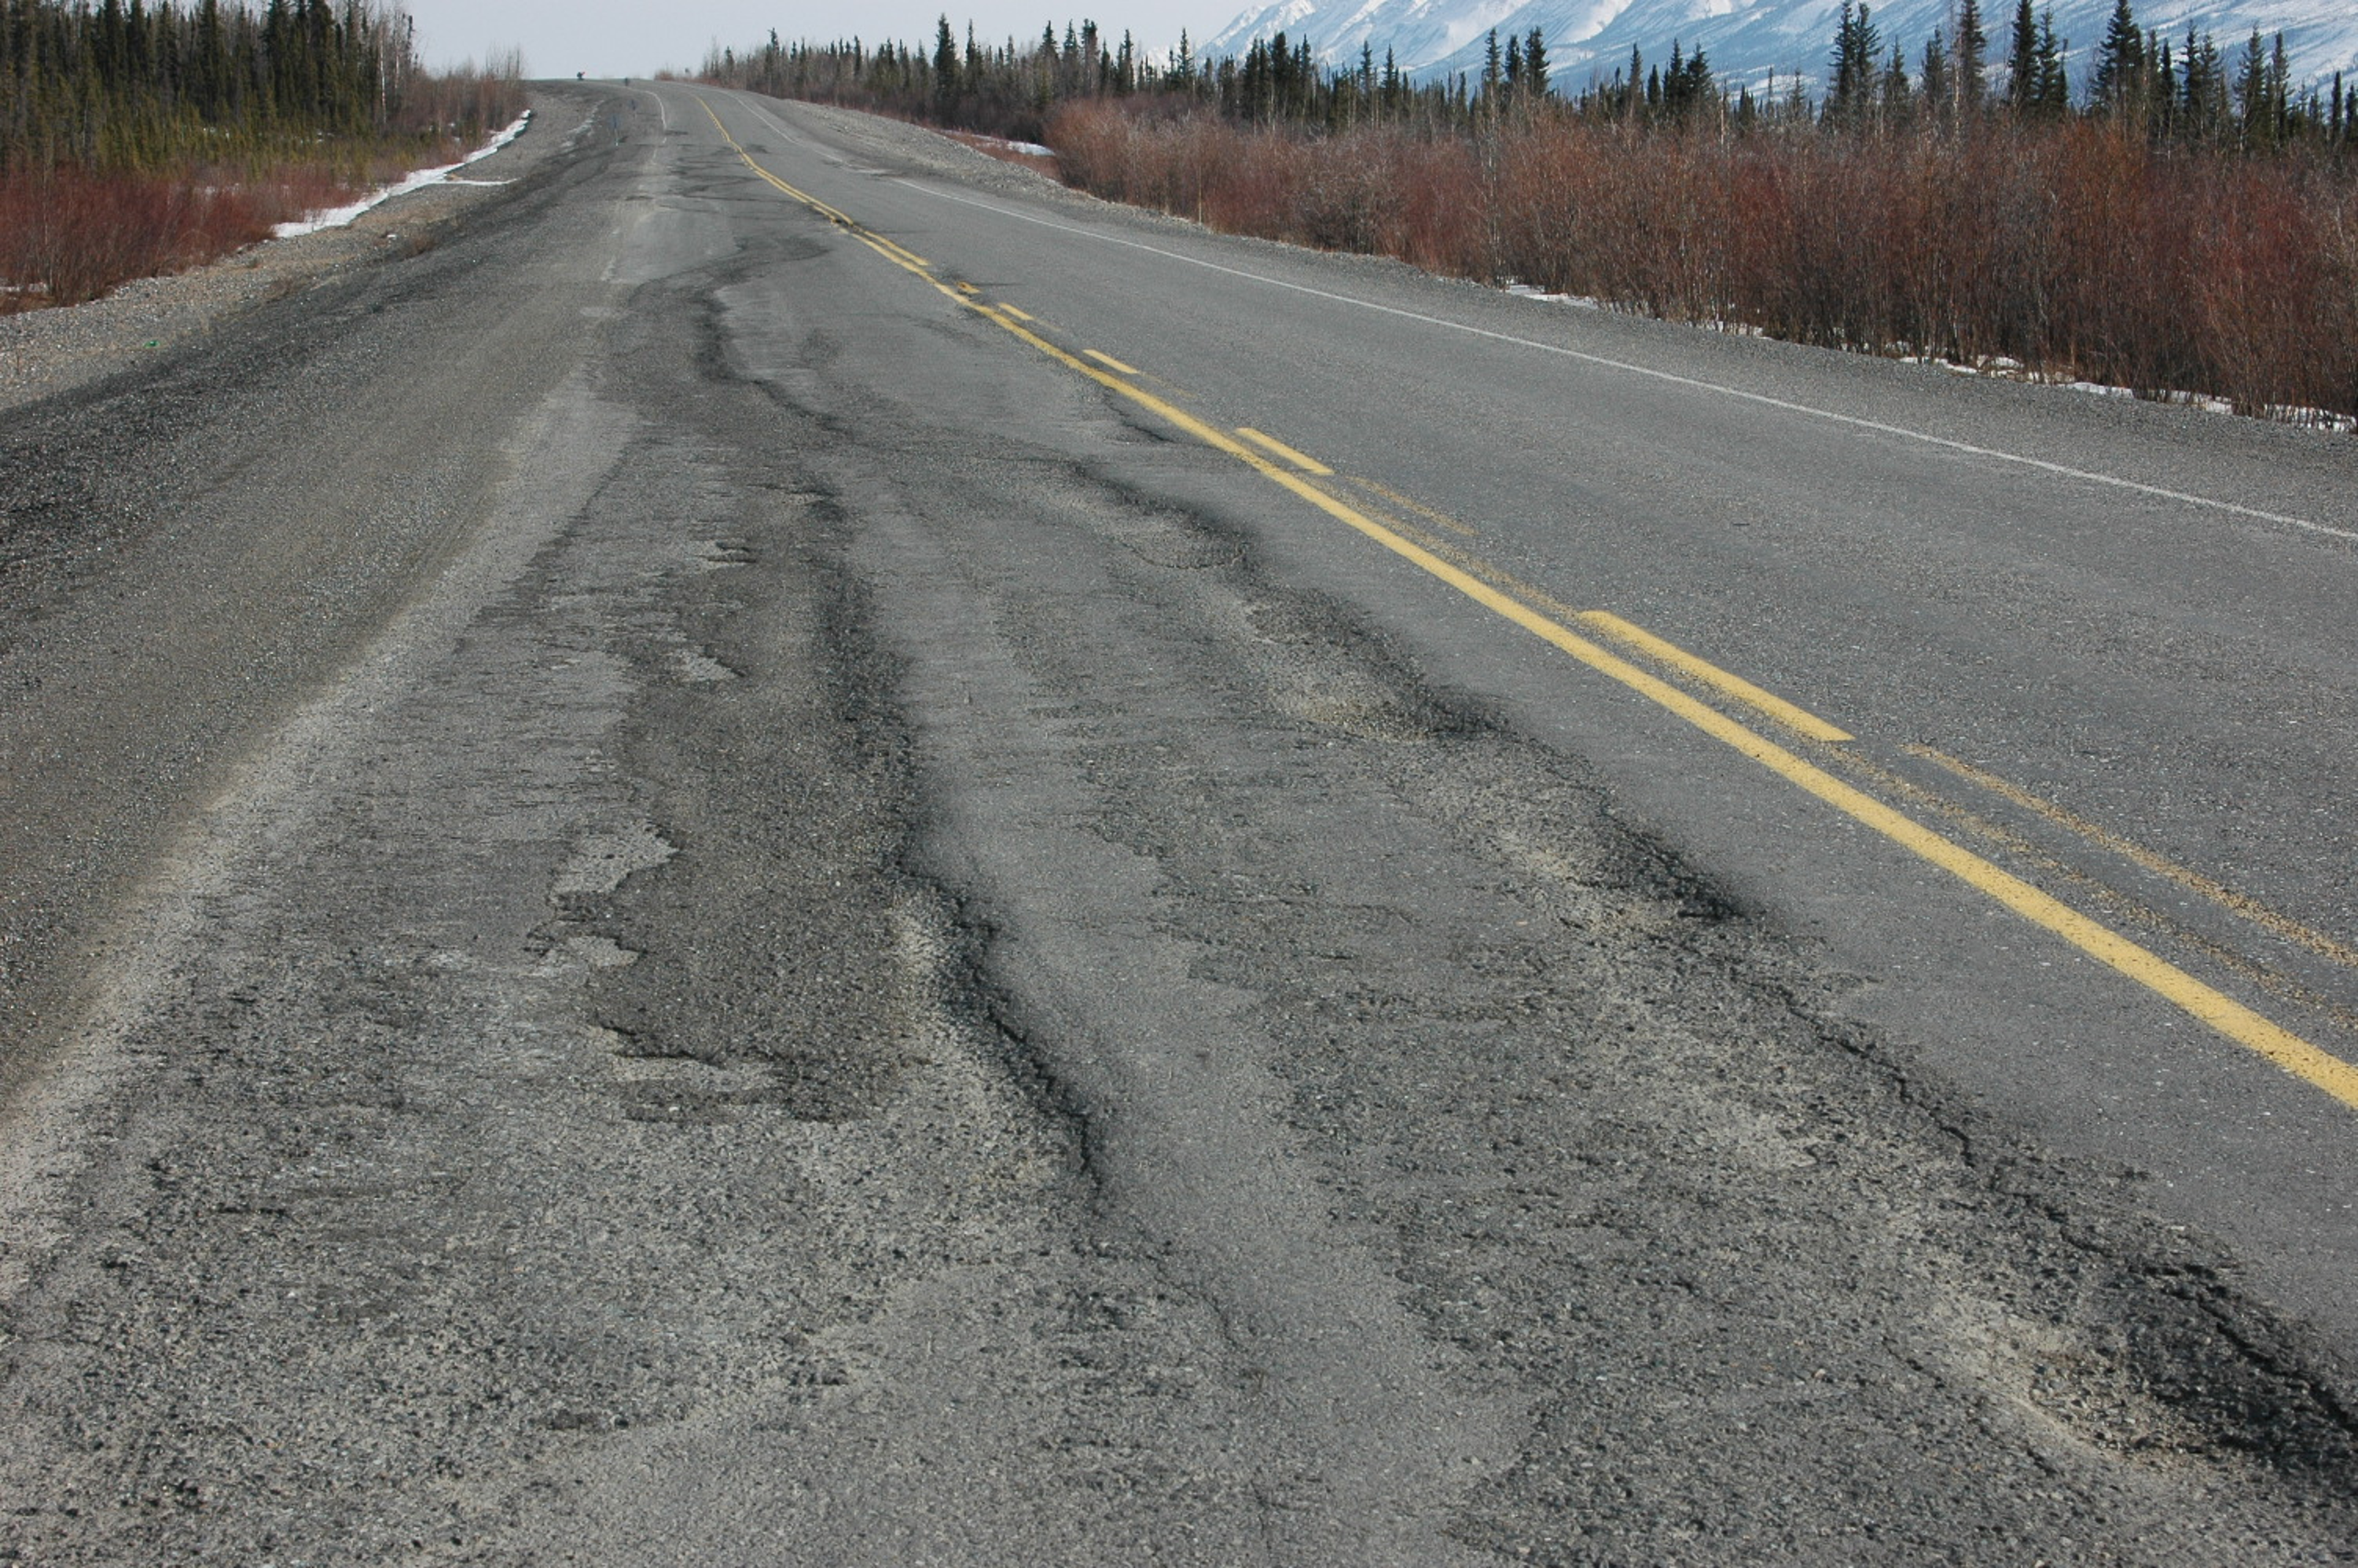 Patched cracks in the road surface.